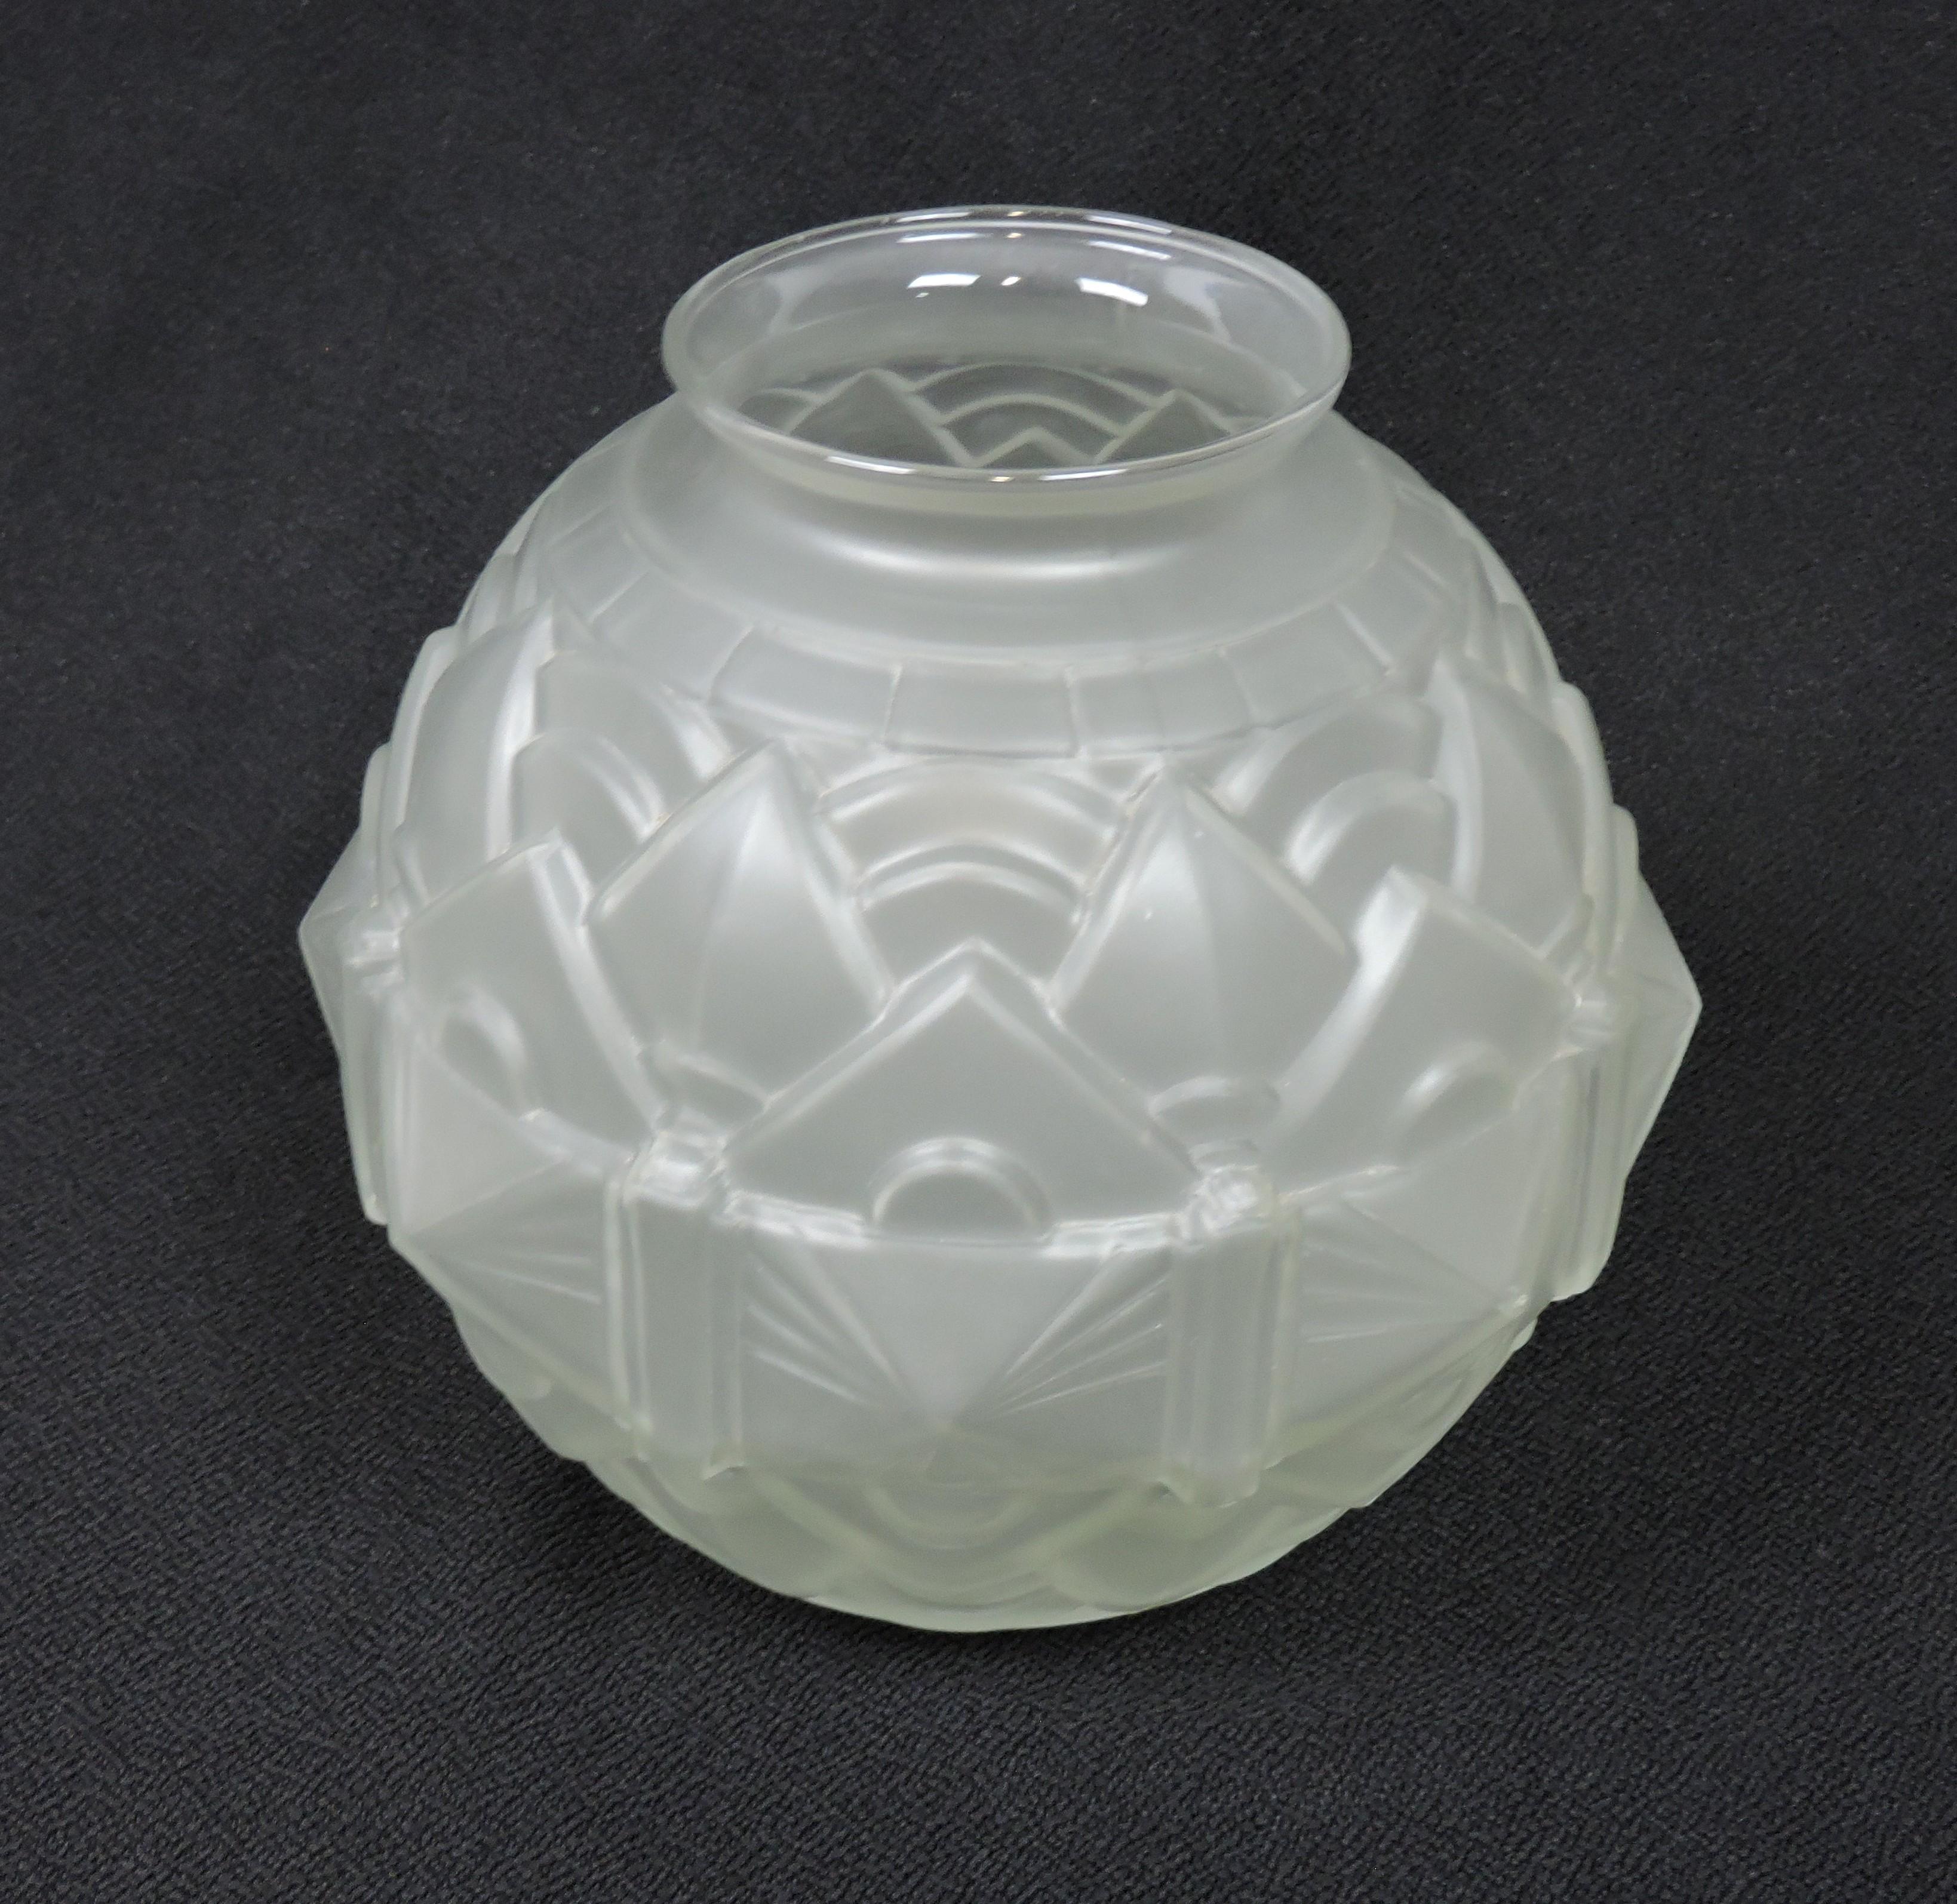 Beautiful French Art Deco mold blown glass vase. This vase has a ball shape with a wonderful geometric relief design and a smooth, acid frosted finish on clear glass.